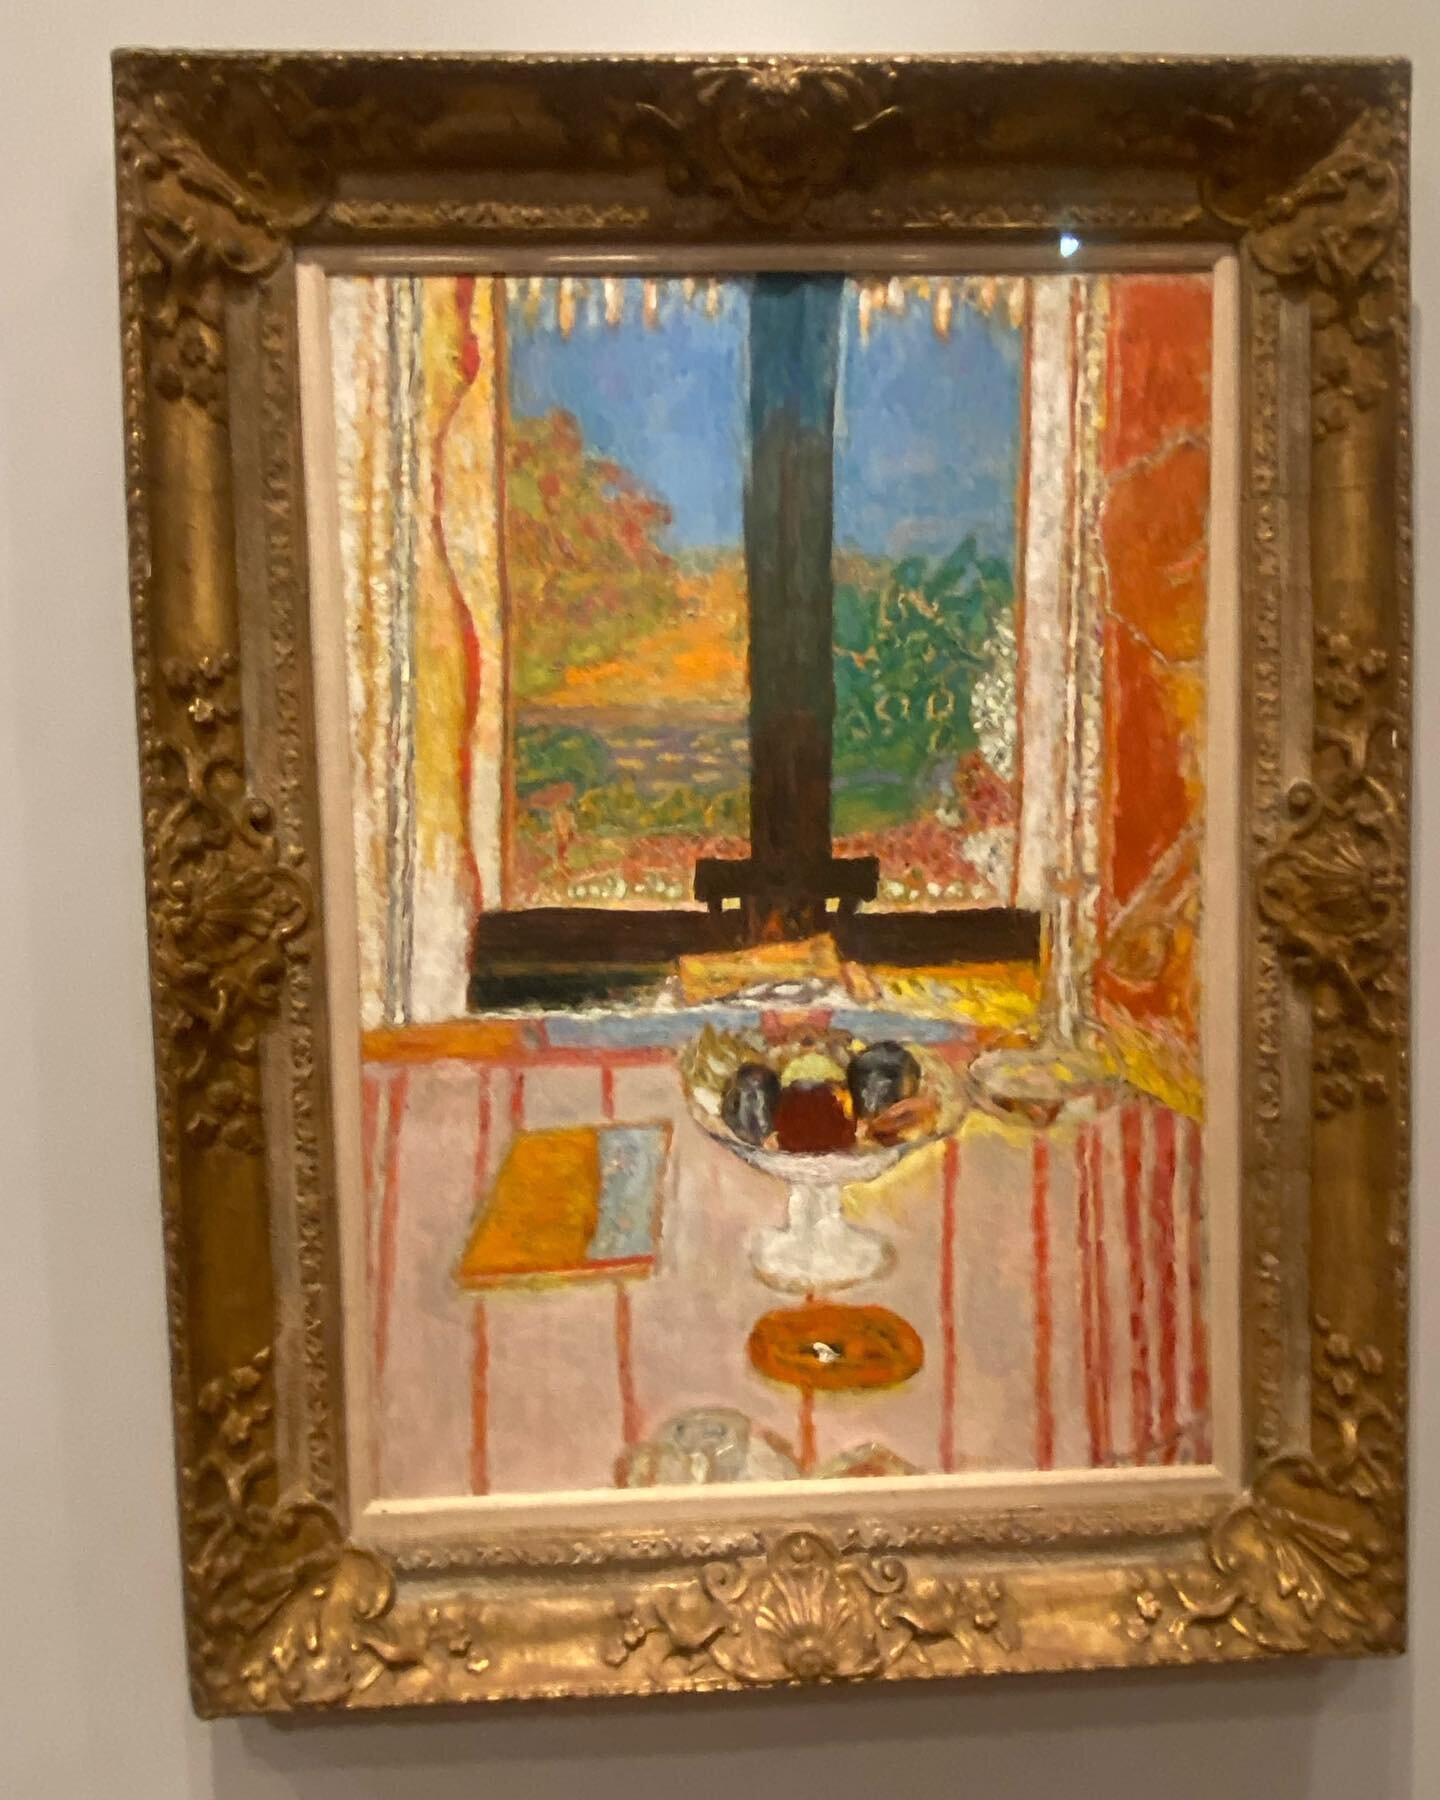 Often mislabeled a late Impressionist,  not entirely surprising given his subject-matter and timing, Pierre Bonnard was part of Les Nabis, artists who studied at the Paris Acad&eacute;mie Julian. Nabis refers to the Hebrew for prophets as in prophets